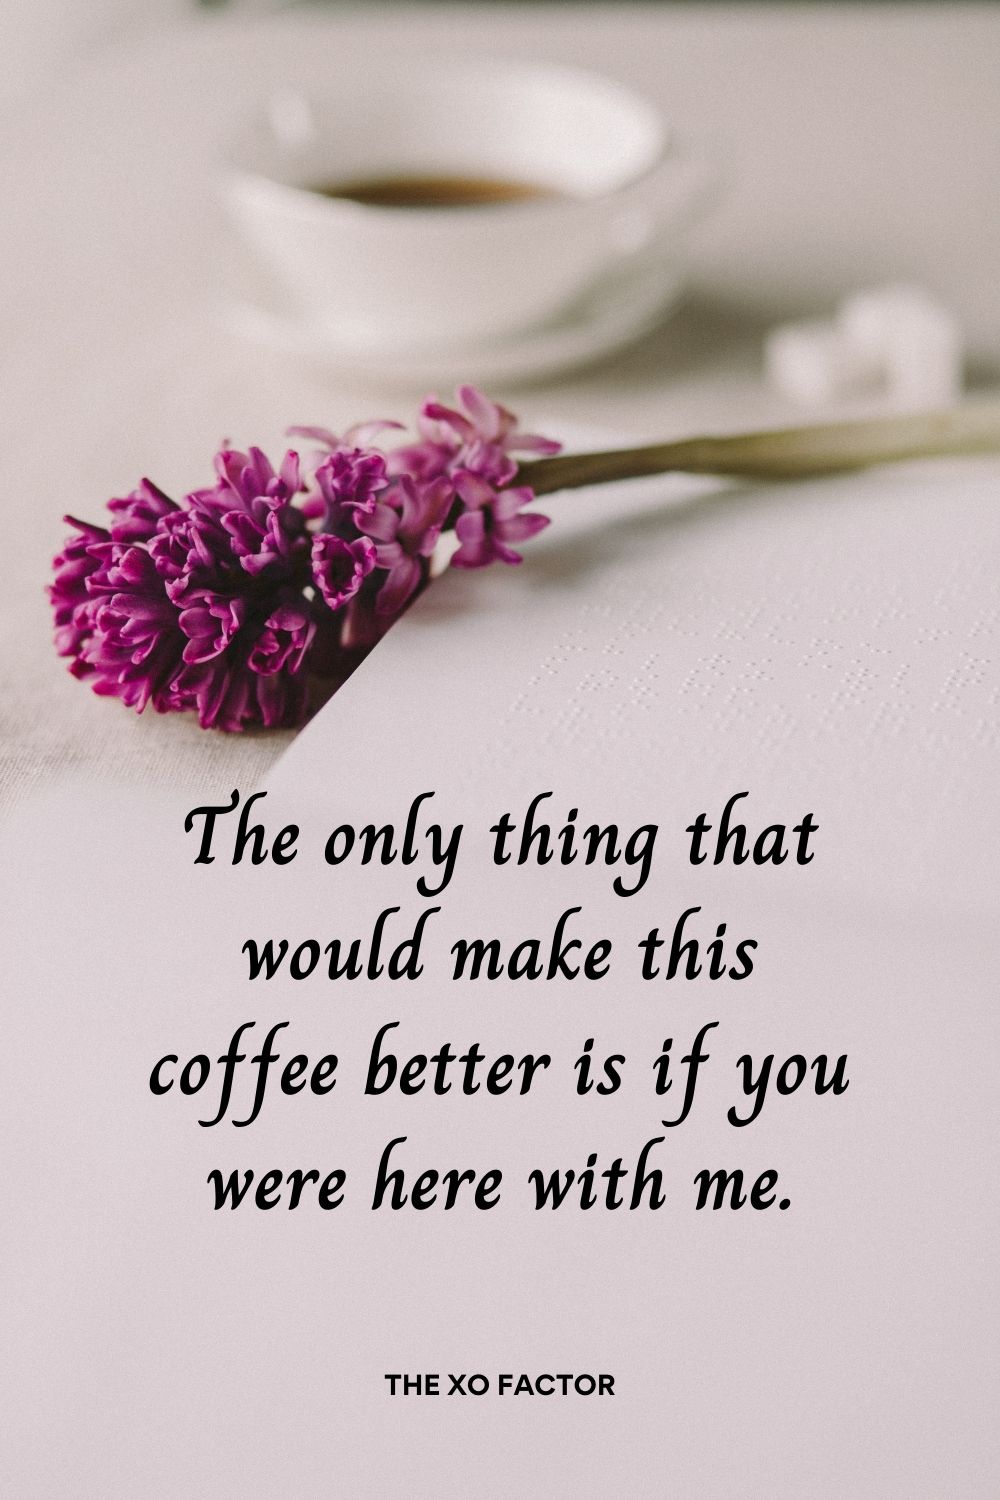 The only thing that would make this coffee better is if you were here with me.